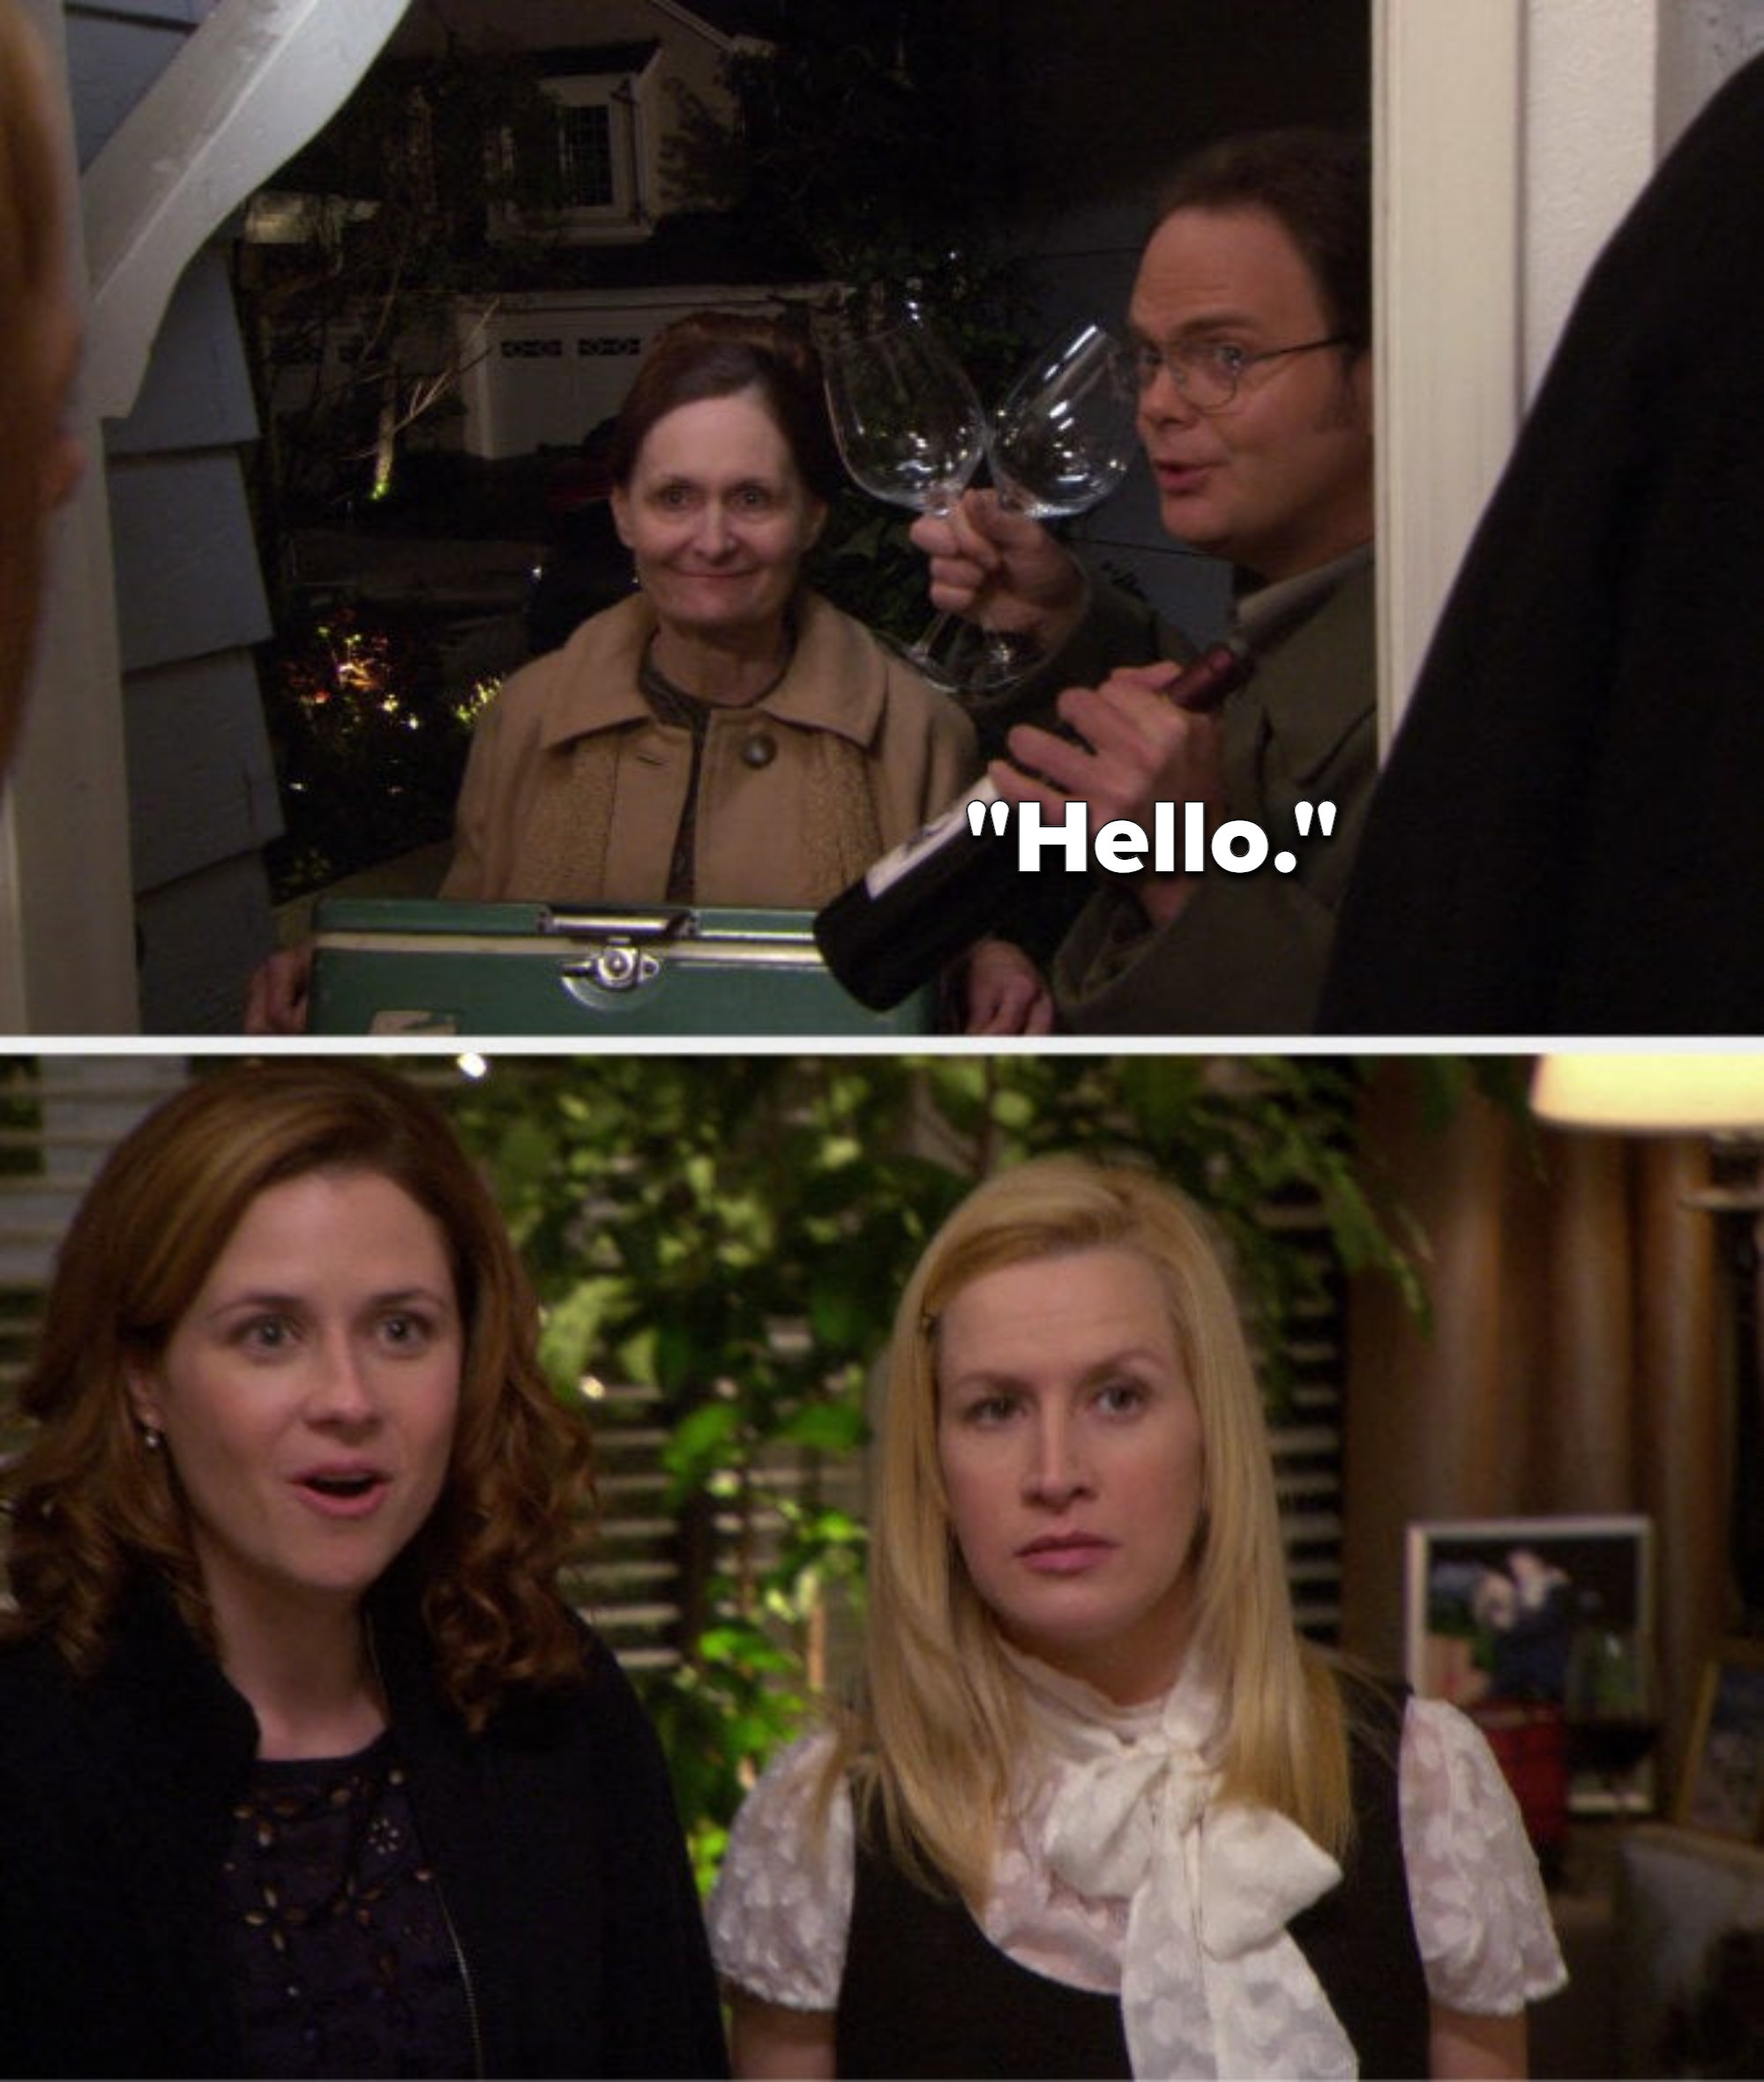 Dwight is at the door and says hello, Pam looks excited and Angels looks annoyed